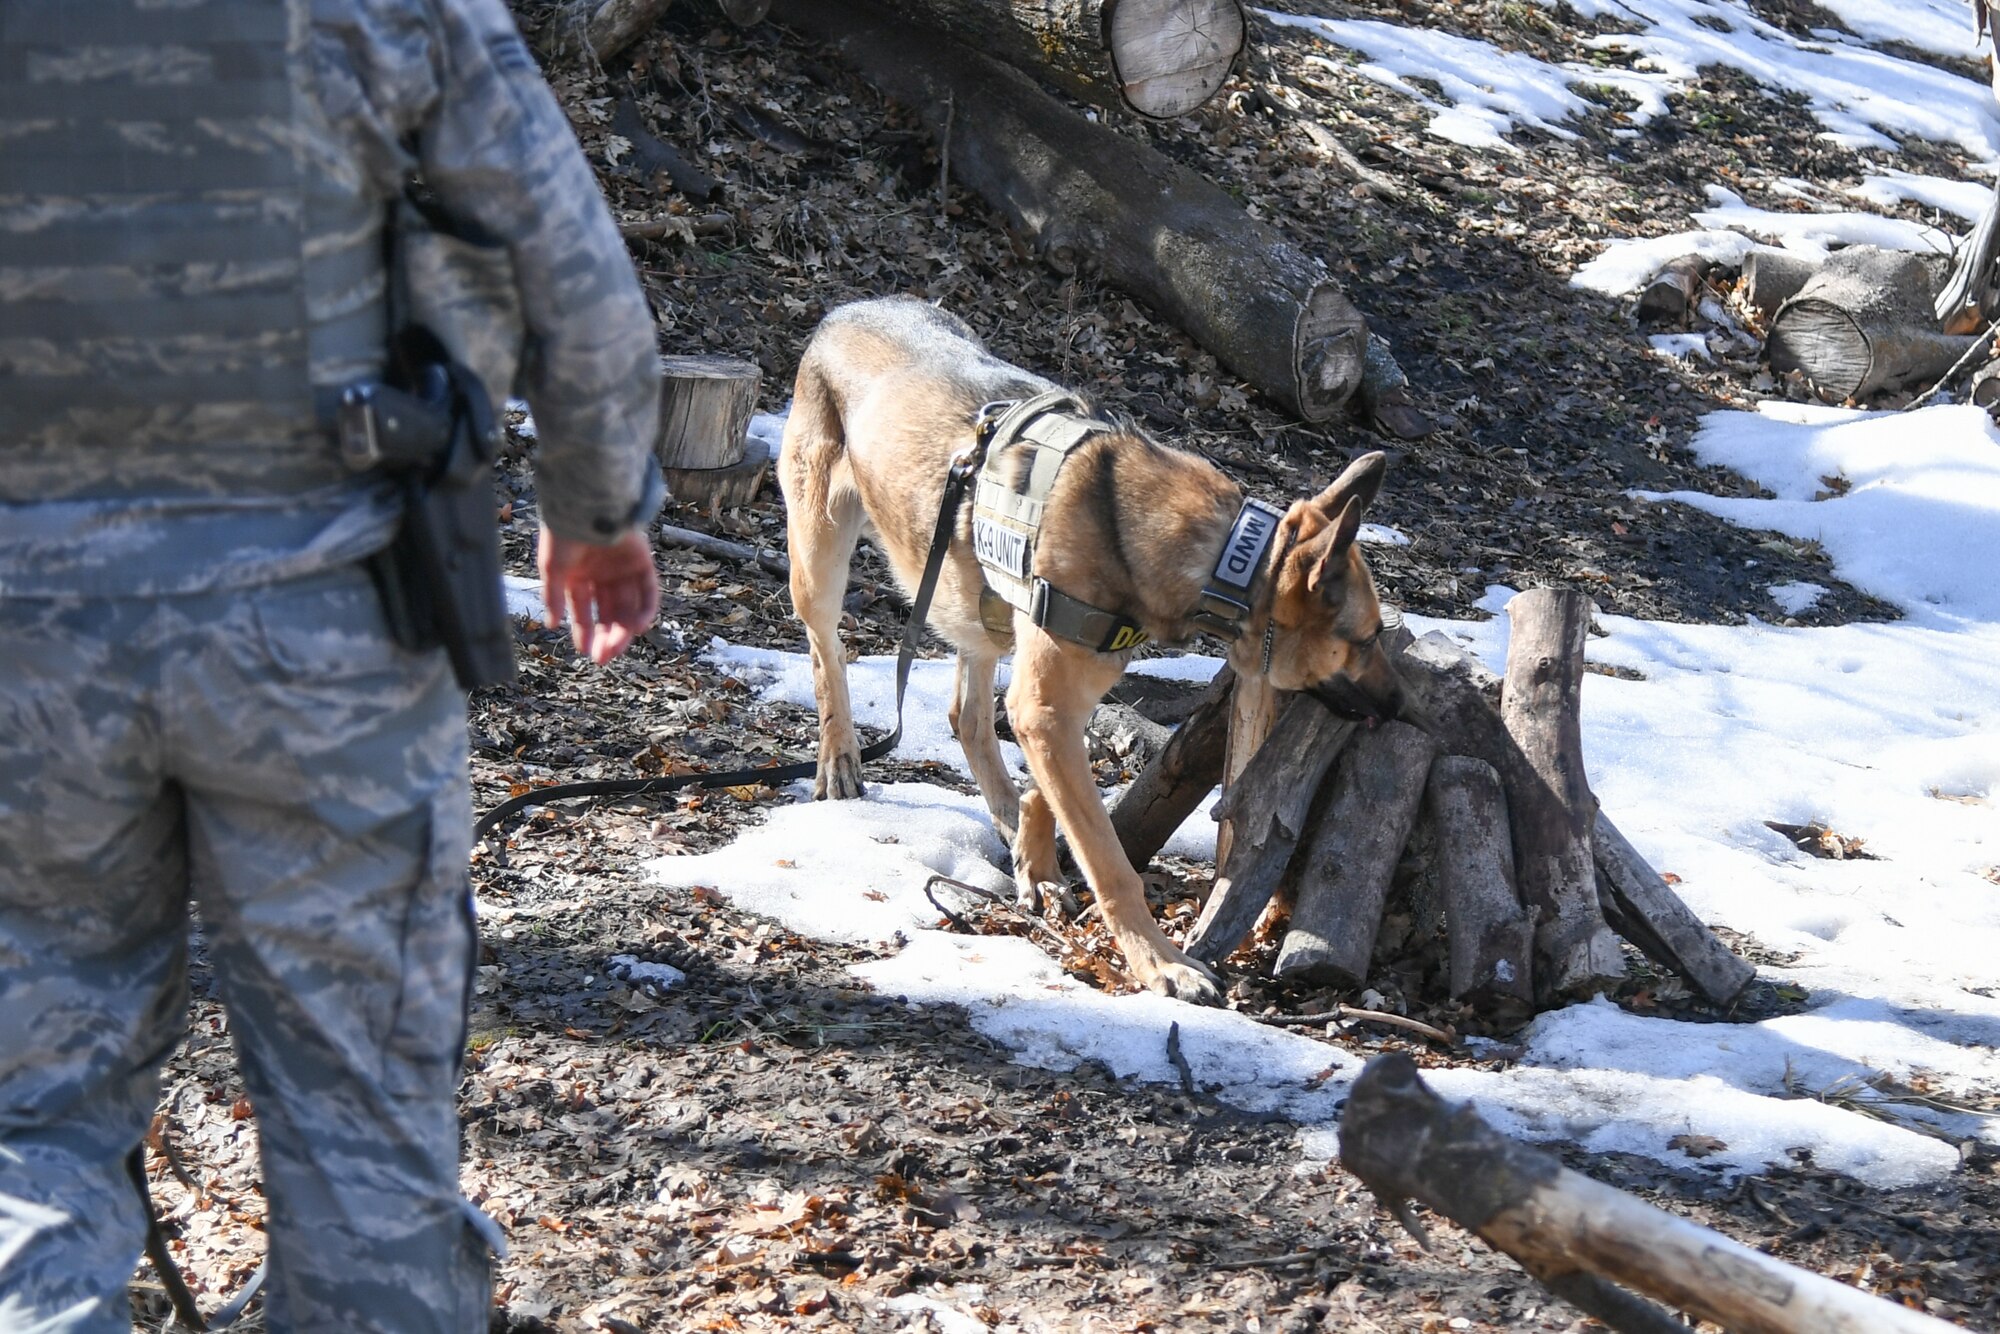 Joe, a military working dog assigned to the 75th Security Force Squadron at Hill Air Force Base, Utah, sniffs around logs to search out an explosive training device March 4, 2020. Joe is a single-purpose MWD, trained as an explosive detection dog. (U.S. Air Force photo by Cynthia Griggs)